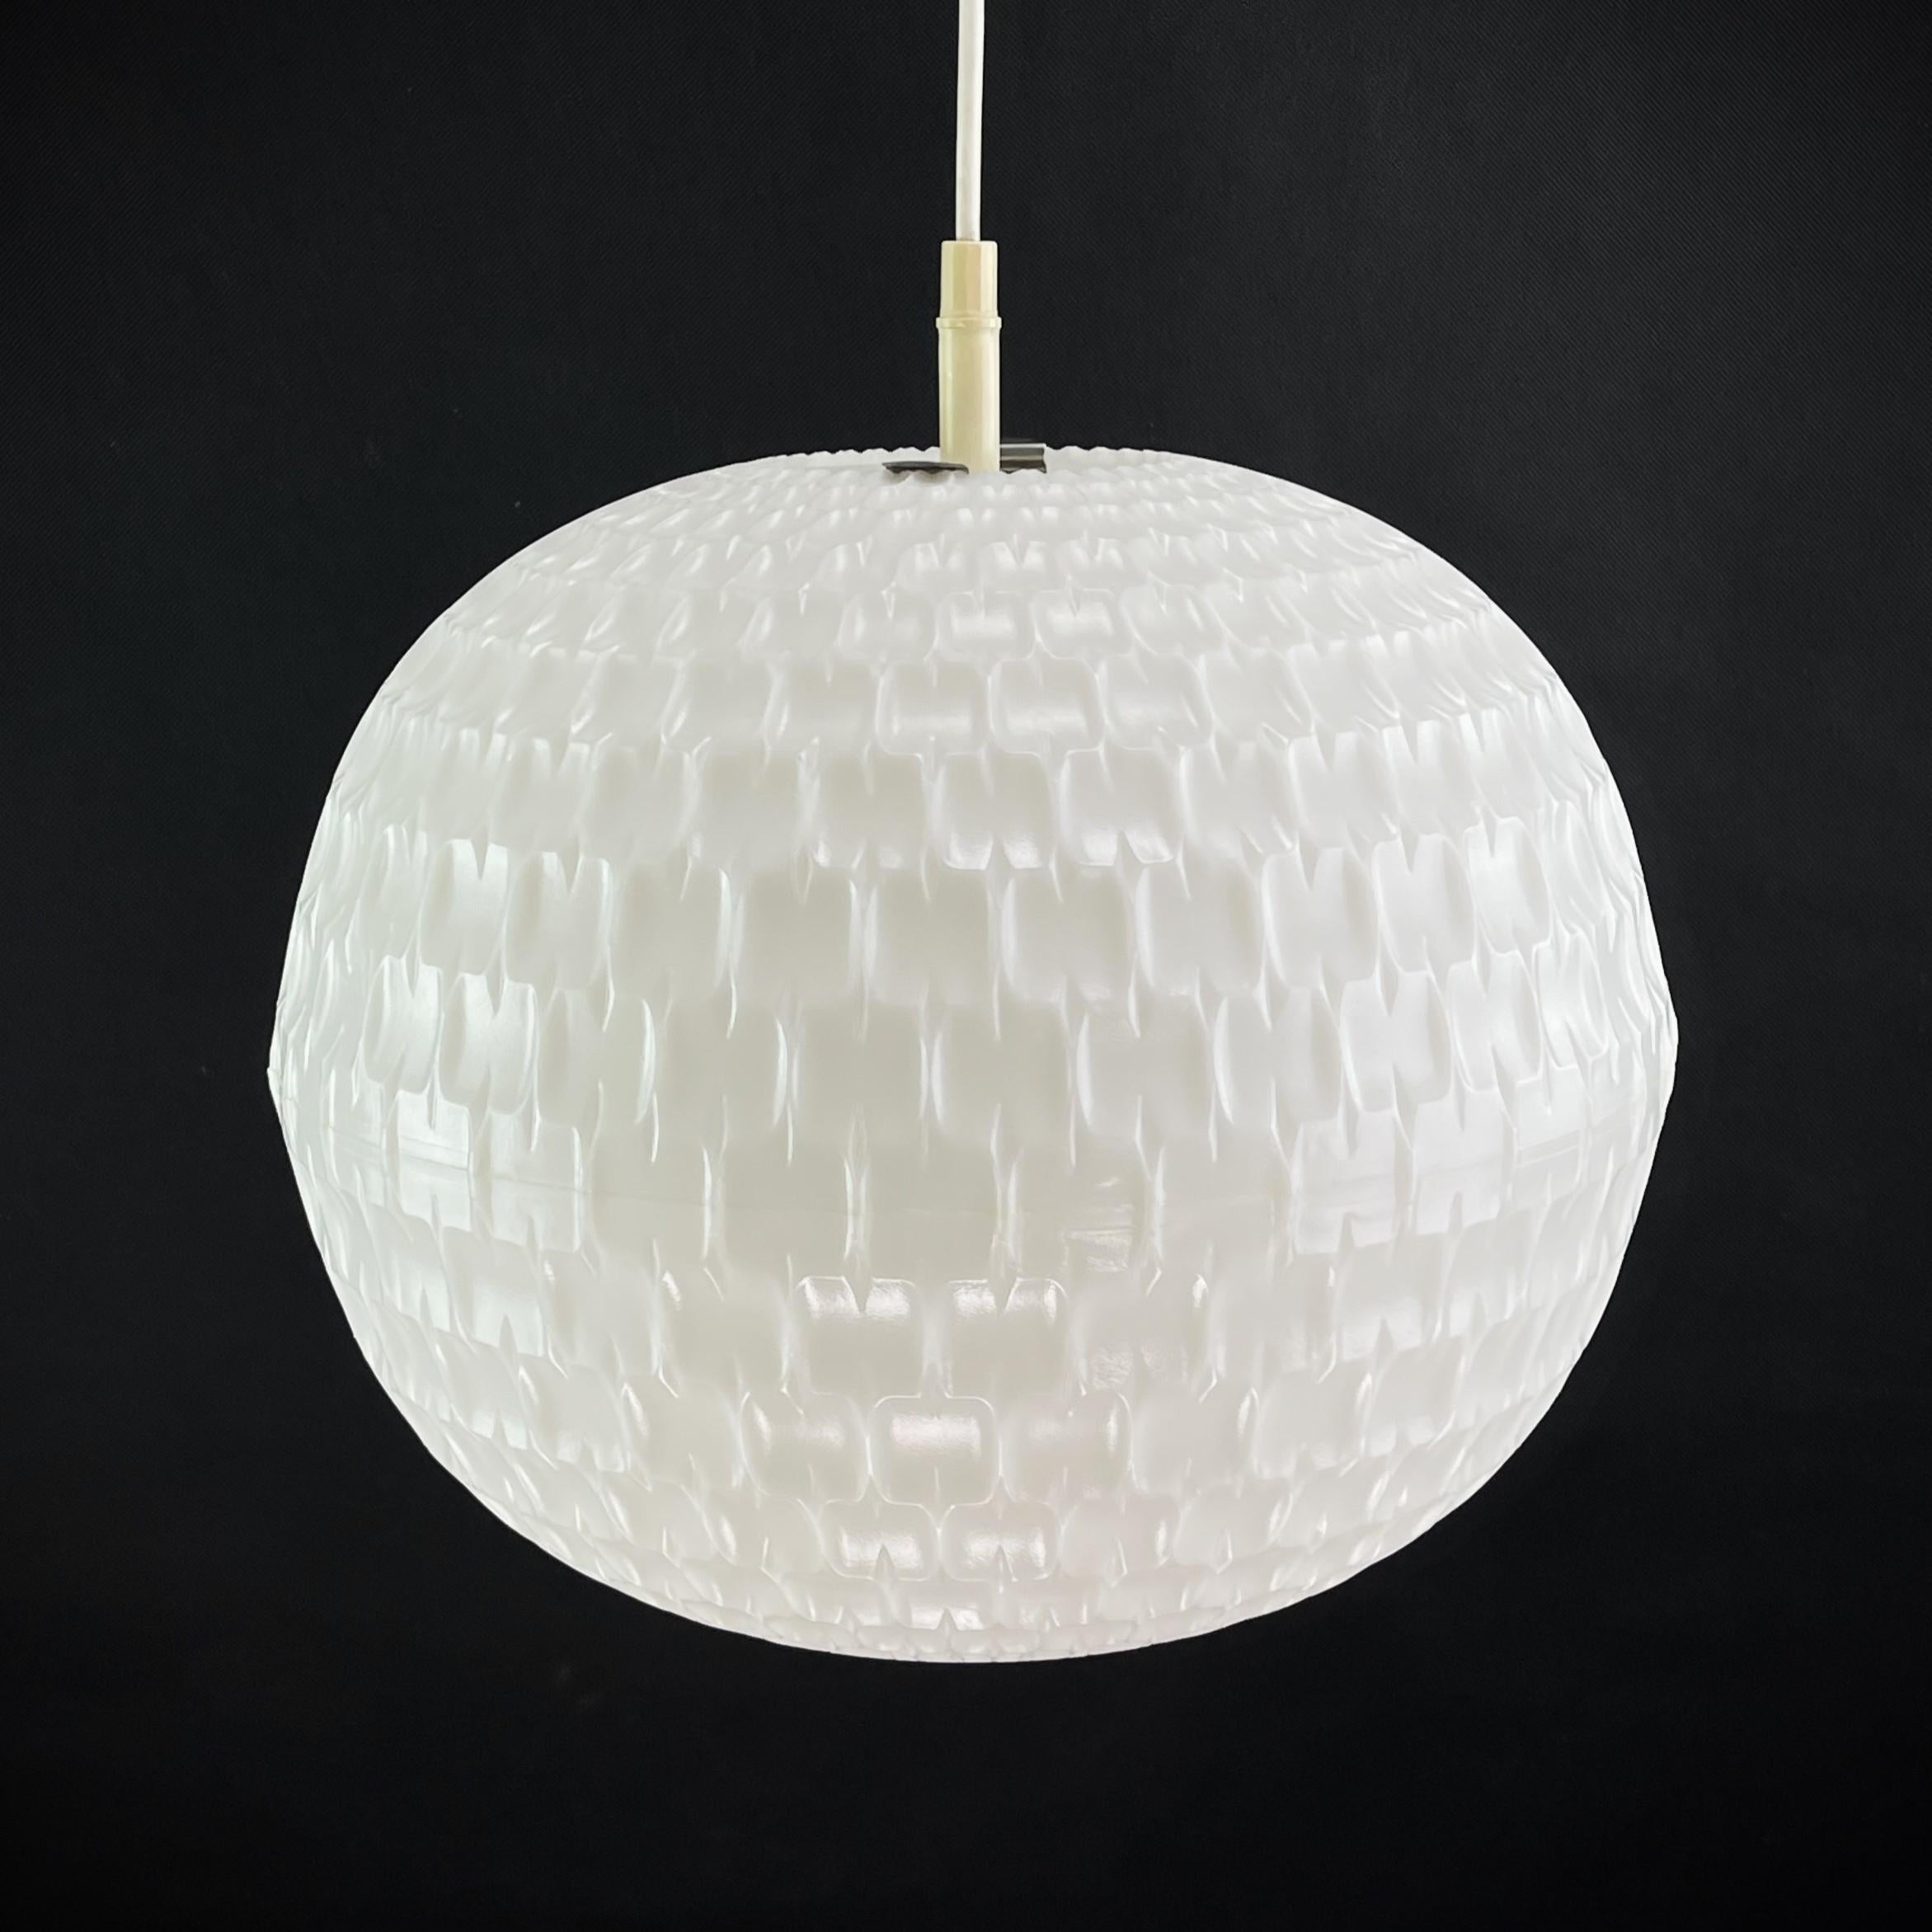 Ceiling lamp by Gangkofner, 1960s

The Great Lamp is a real design classic from the 1960s. The hanging lamp was designed by Aloys Ferdinand Gangkofner for Erco. This lamp with its extraordinary design is a highlight for any lounge interior of the